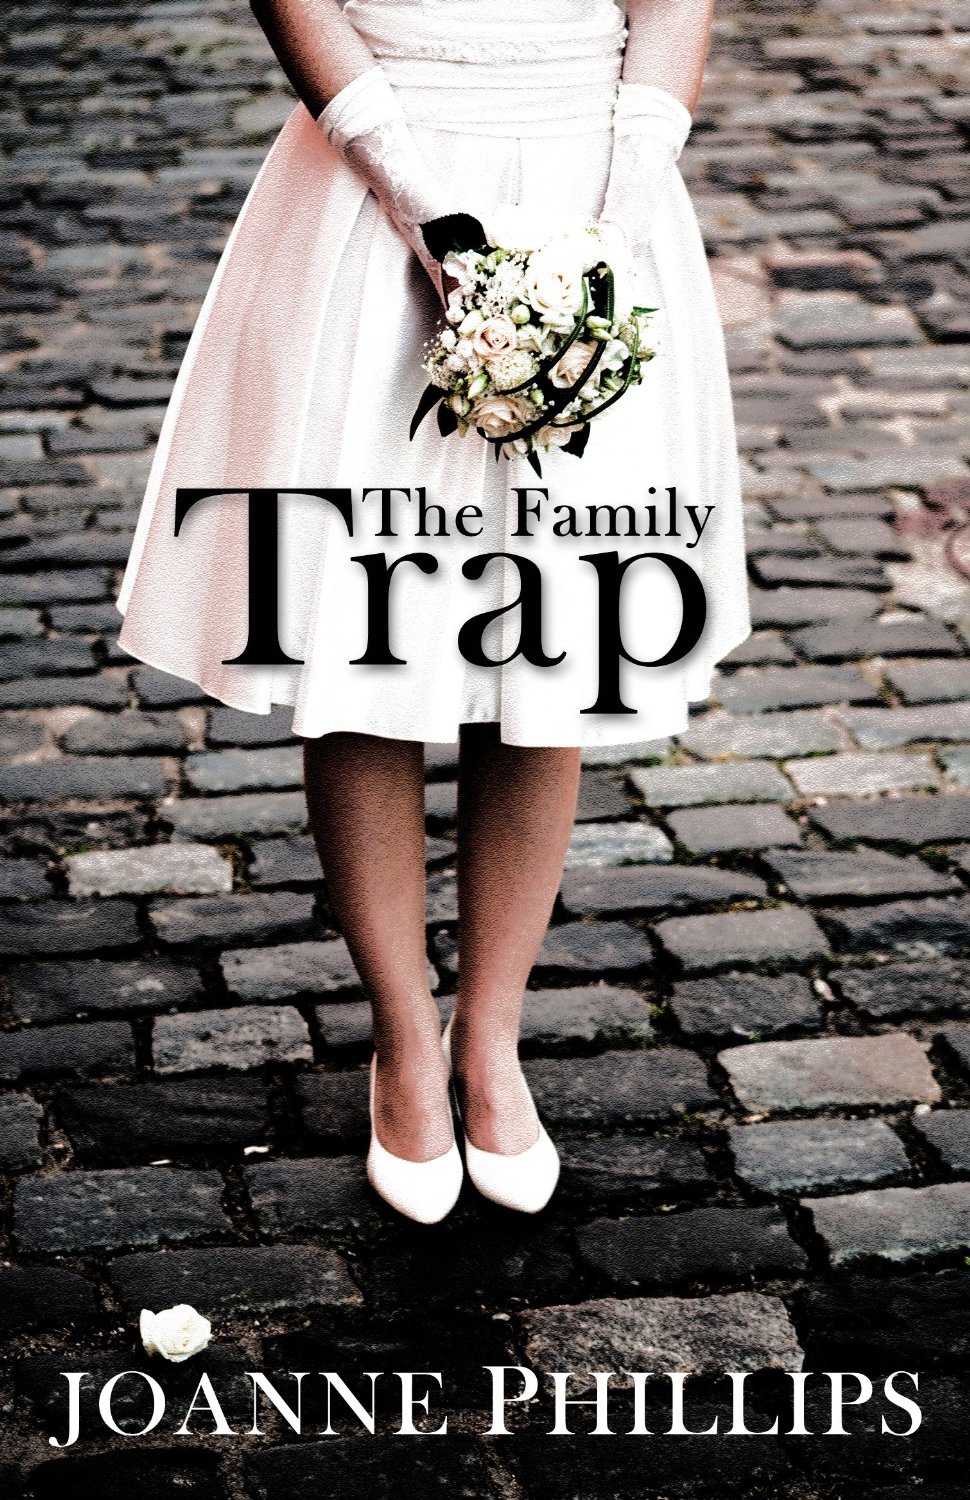 The Family Trap: A British Chick Lit Romantic Comedy (Can’t Live Without Book 2) by Joanne Phillips